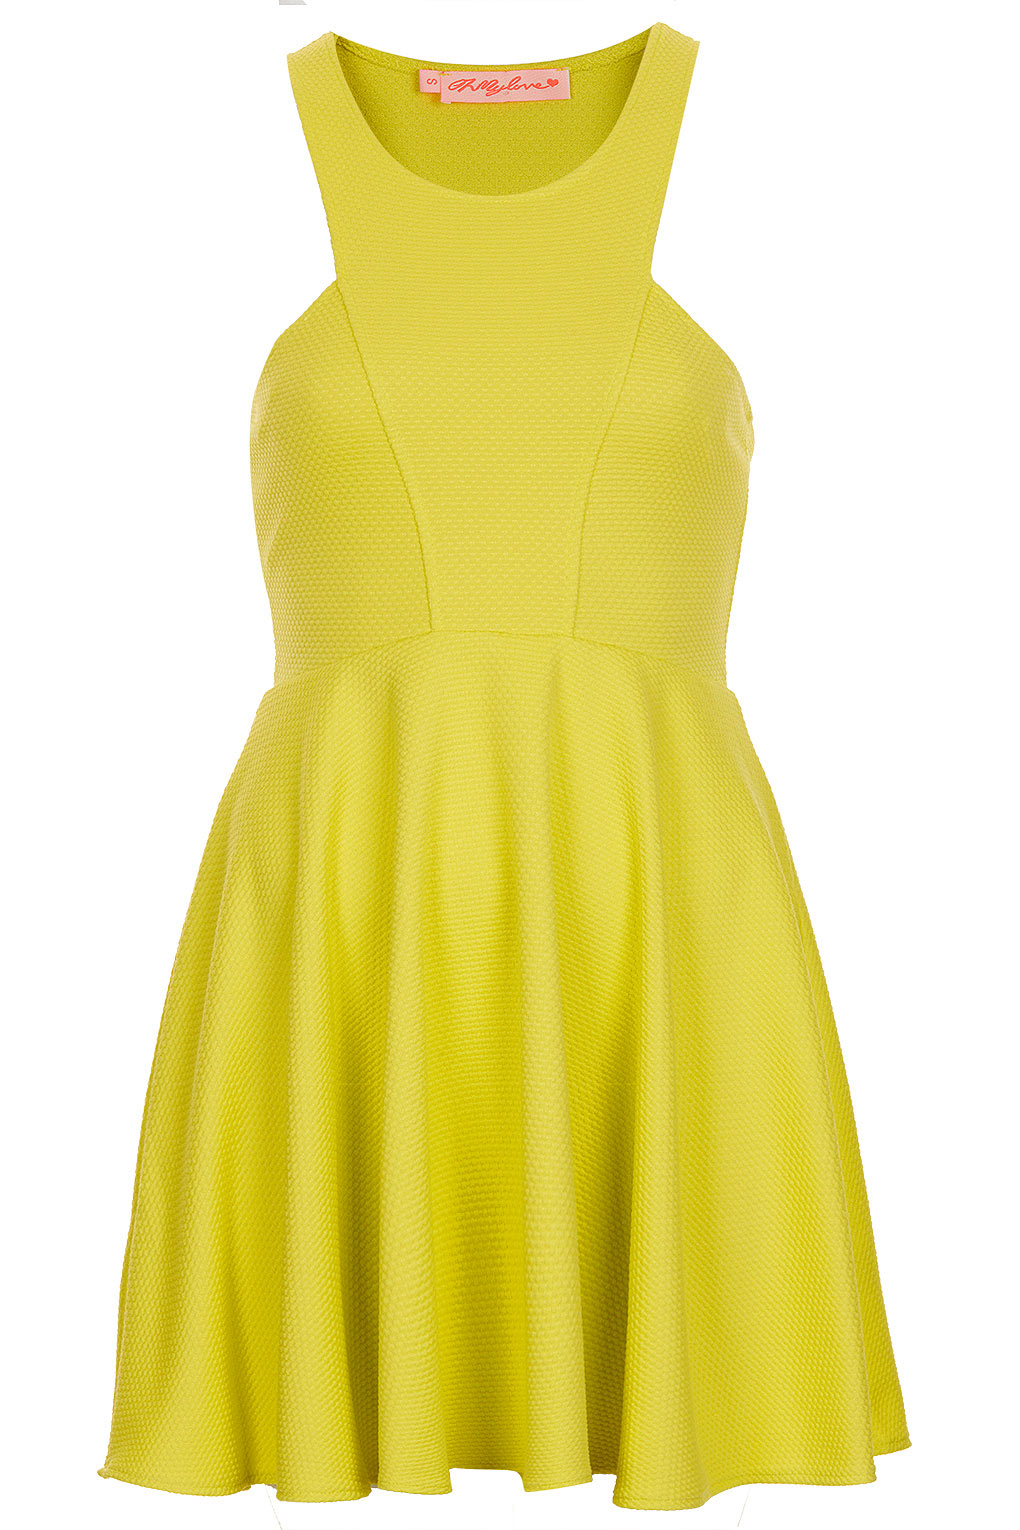 Topshop Textured Skater Dress By Oh My Love in Yellow | Lyst